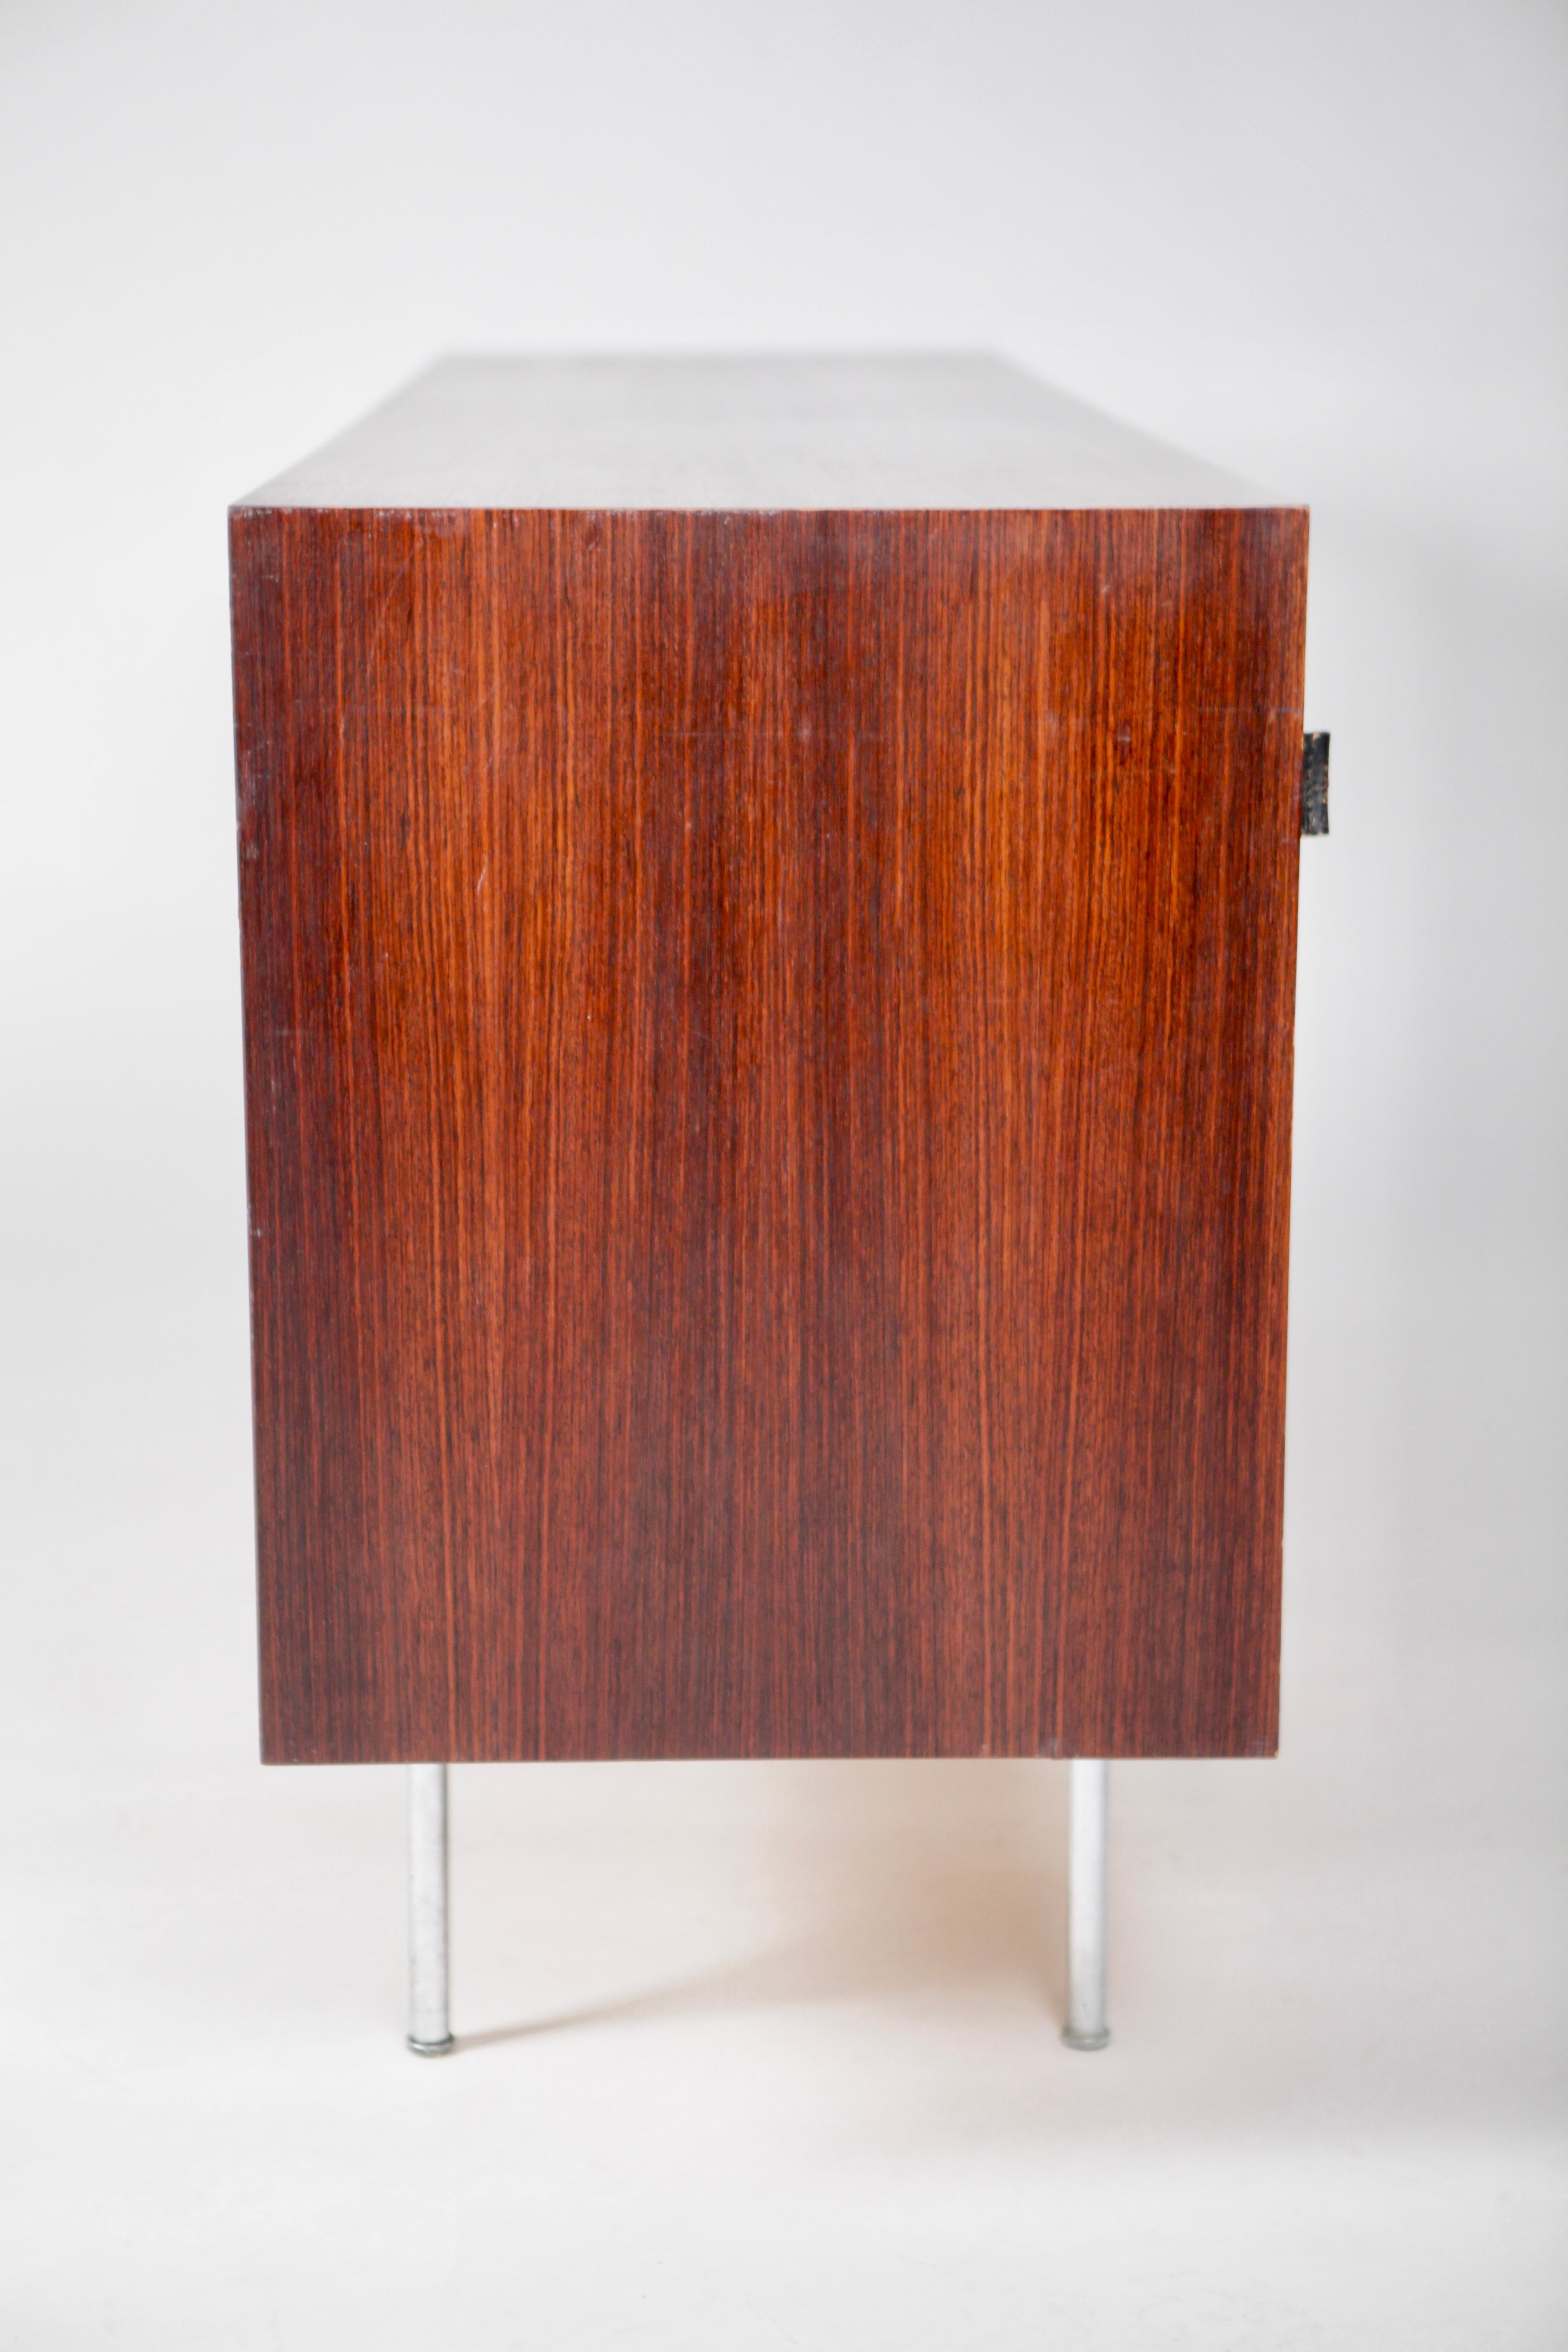 Sideboard in East Indian Rosewood & Seagrass by Florence Knoll, Designed 1947 For Sale 3